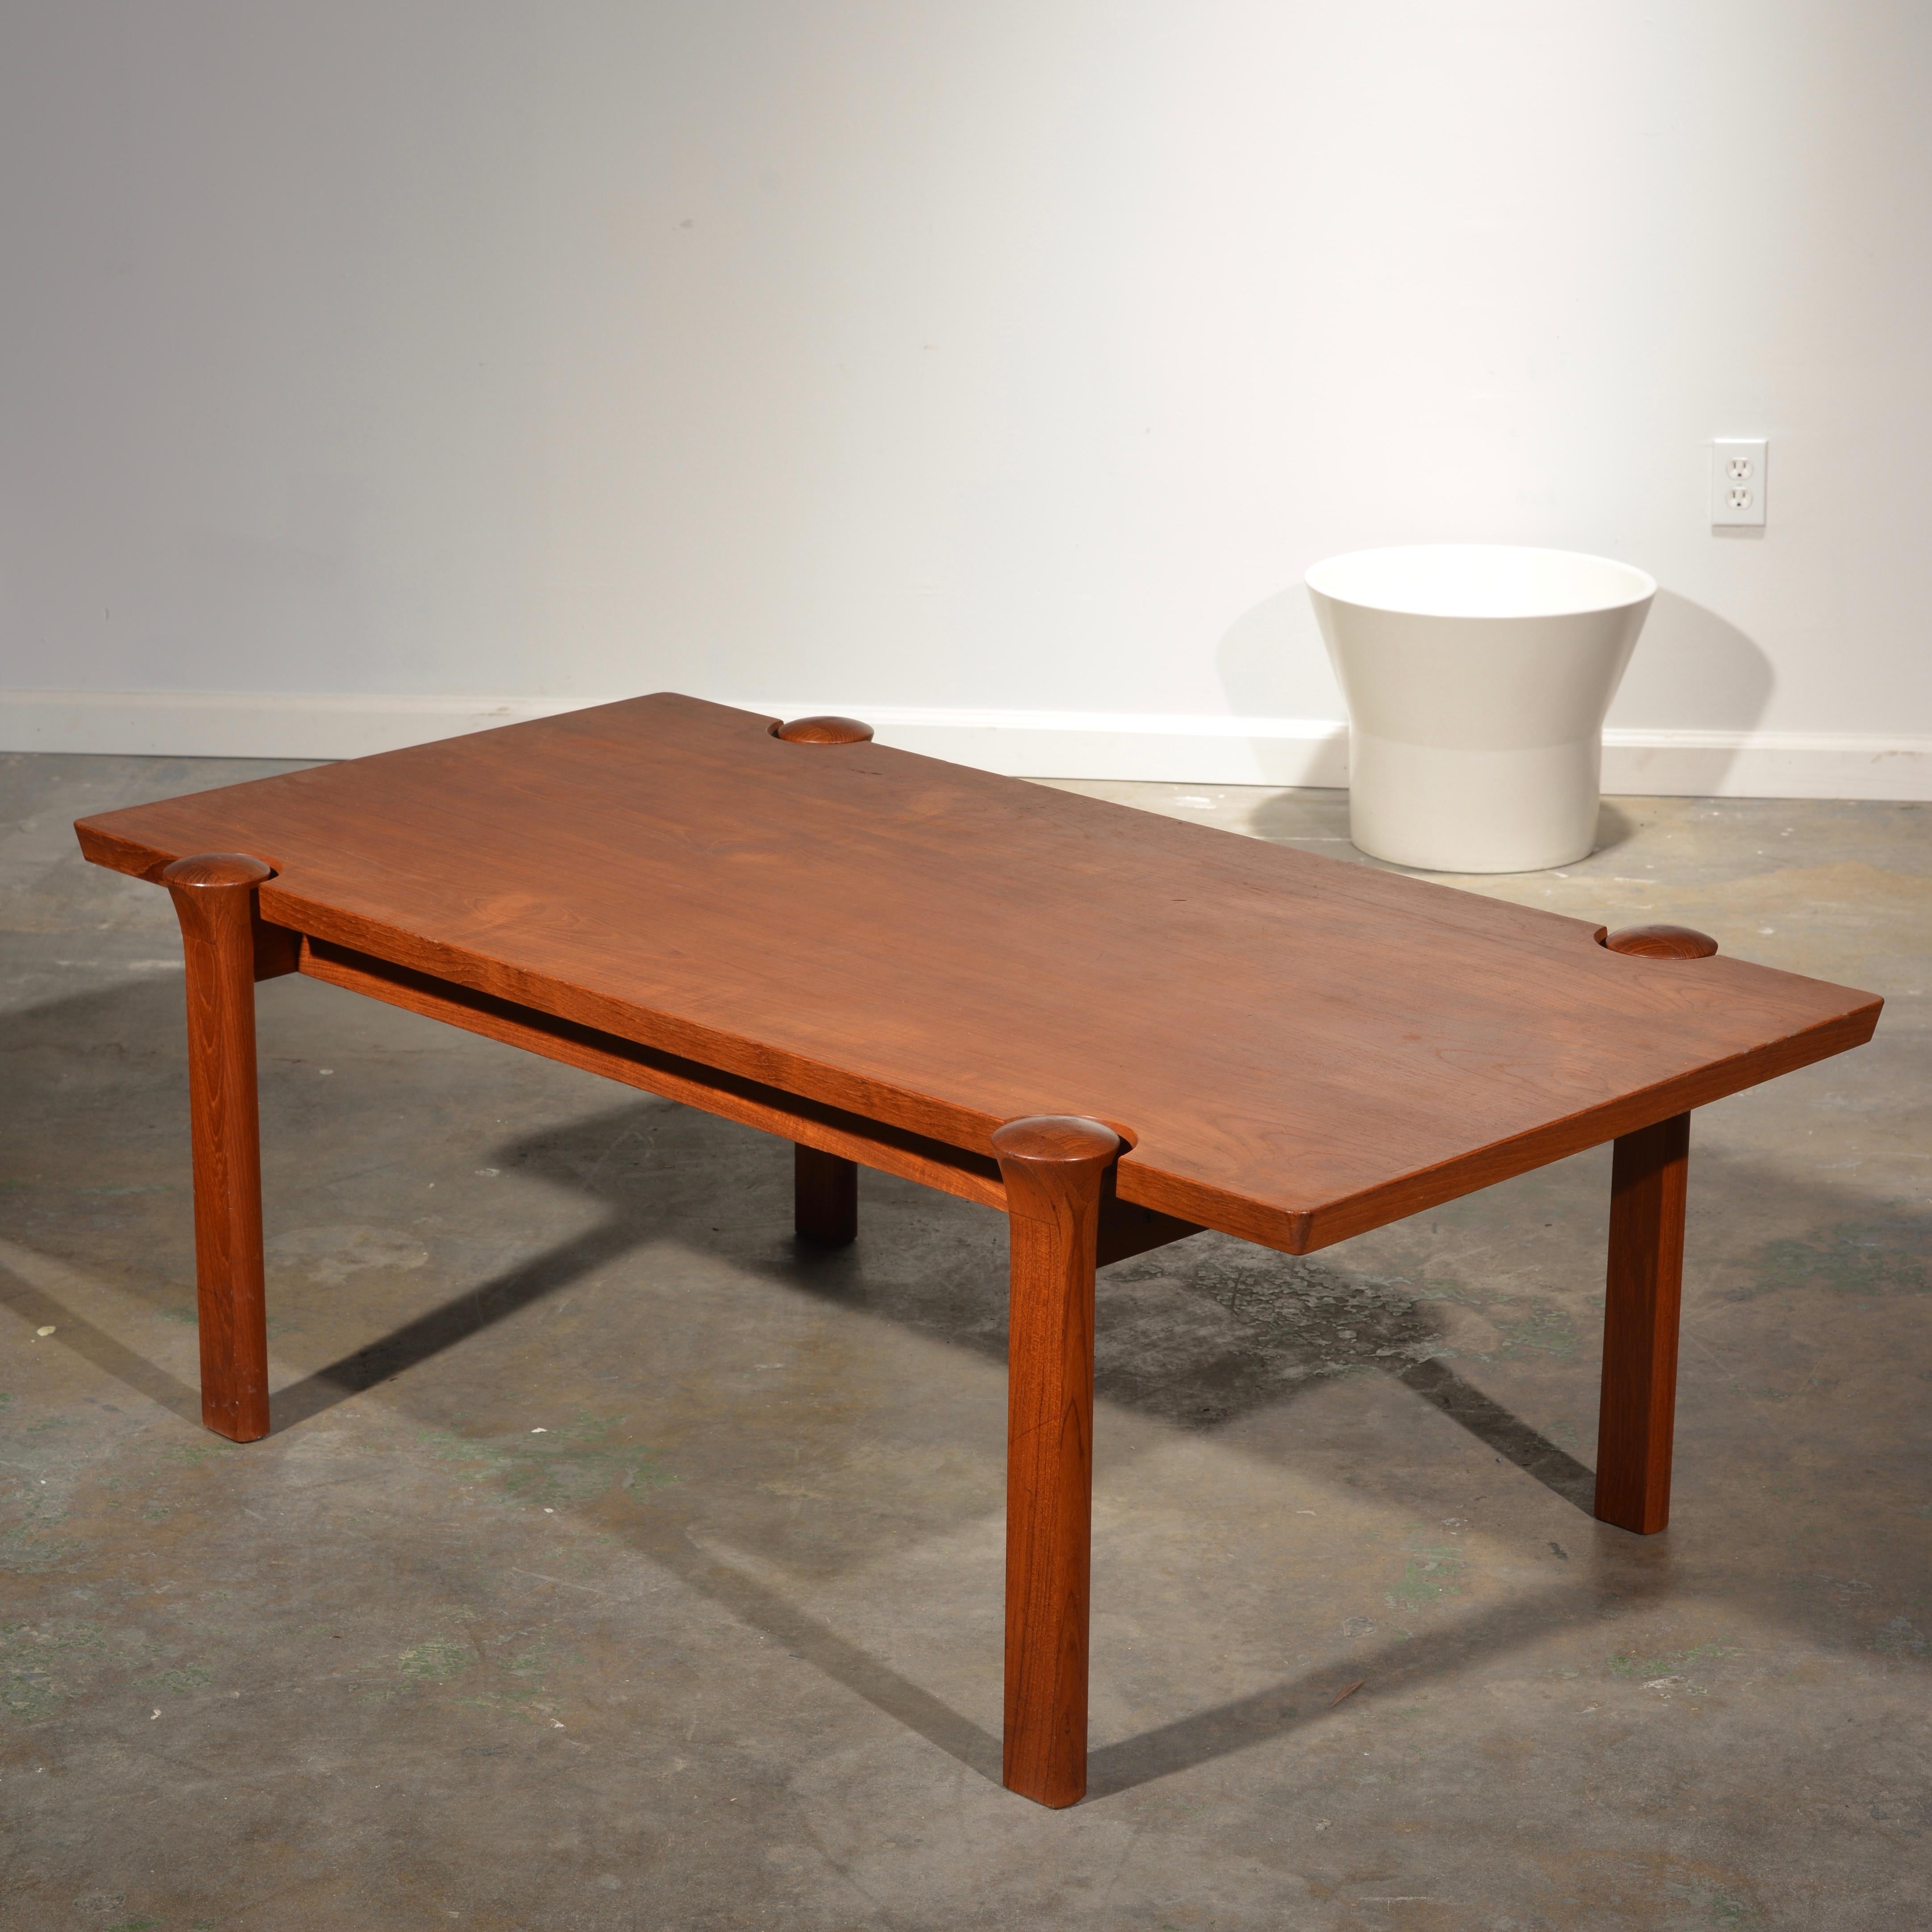 Rare teak coffee table by Arne Vodder for Cado, 1960. Made from solid teak.